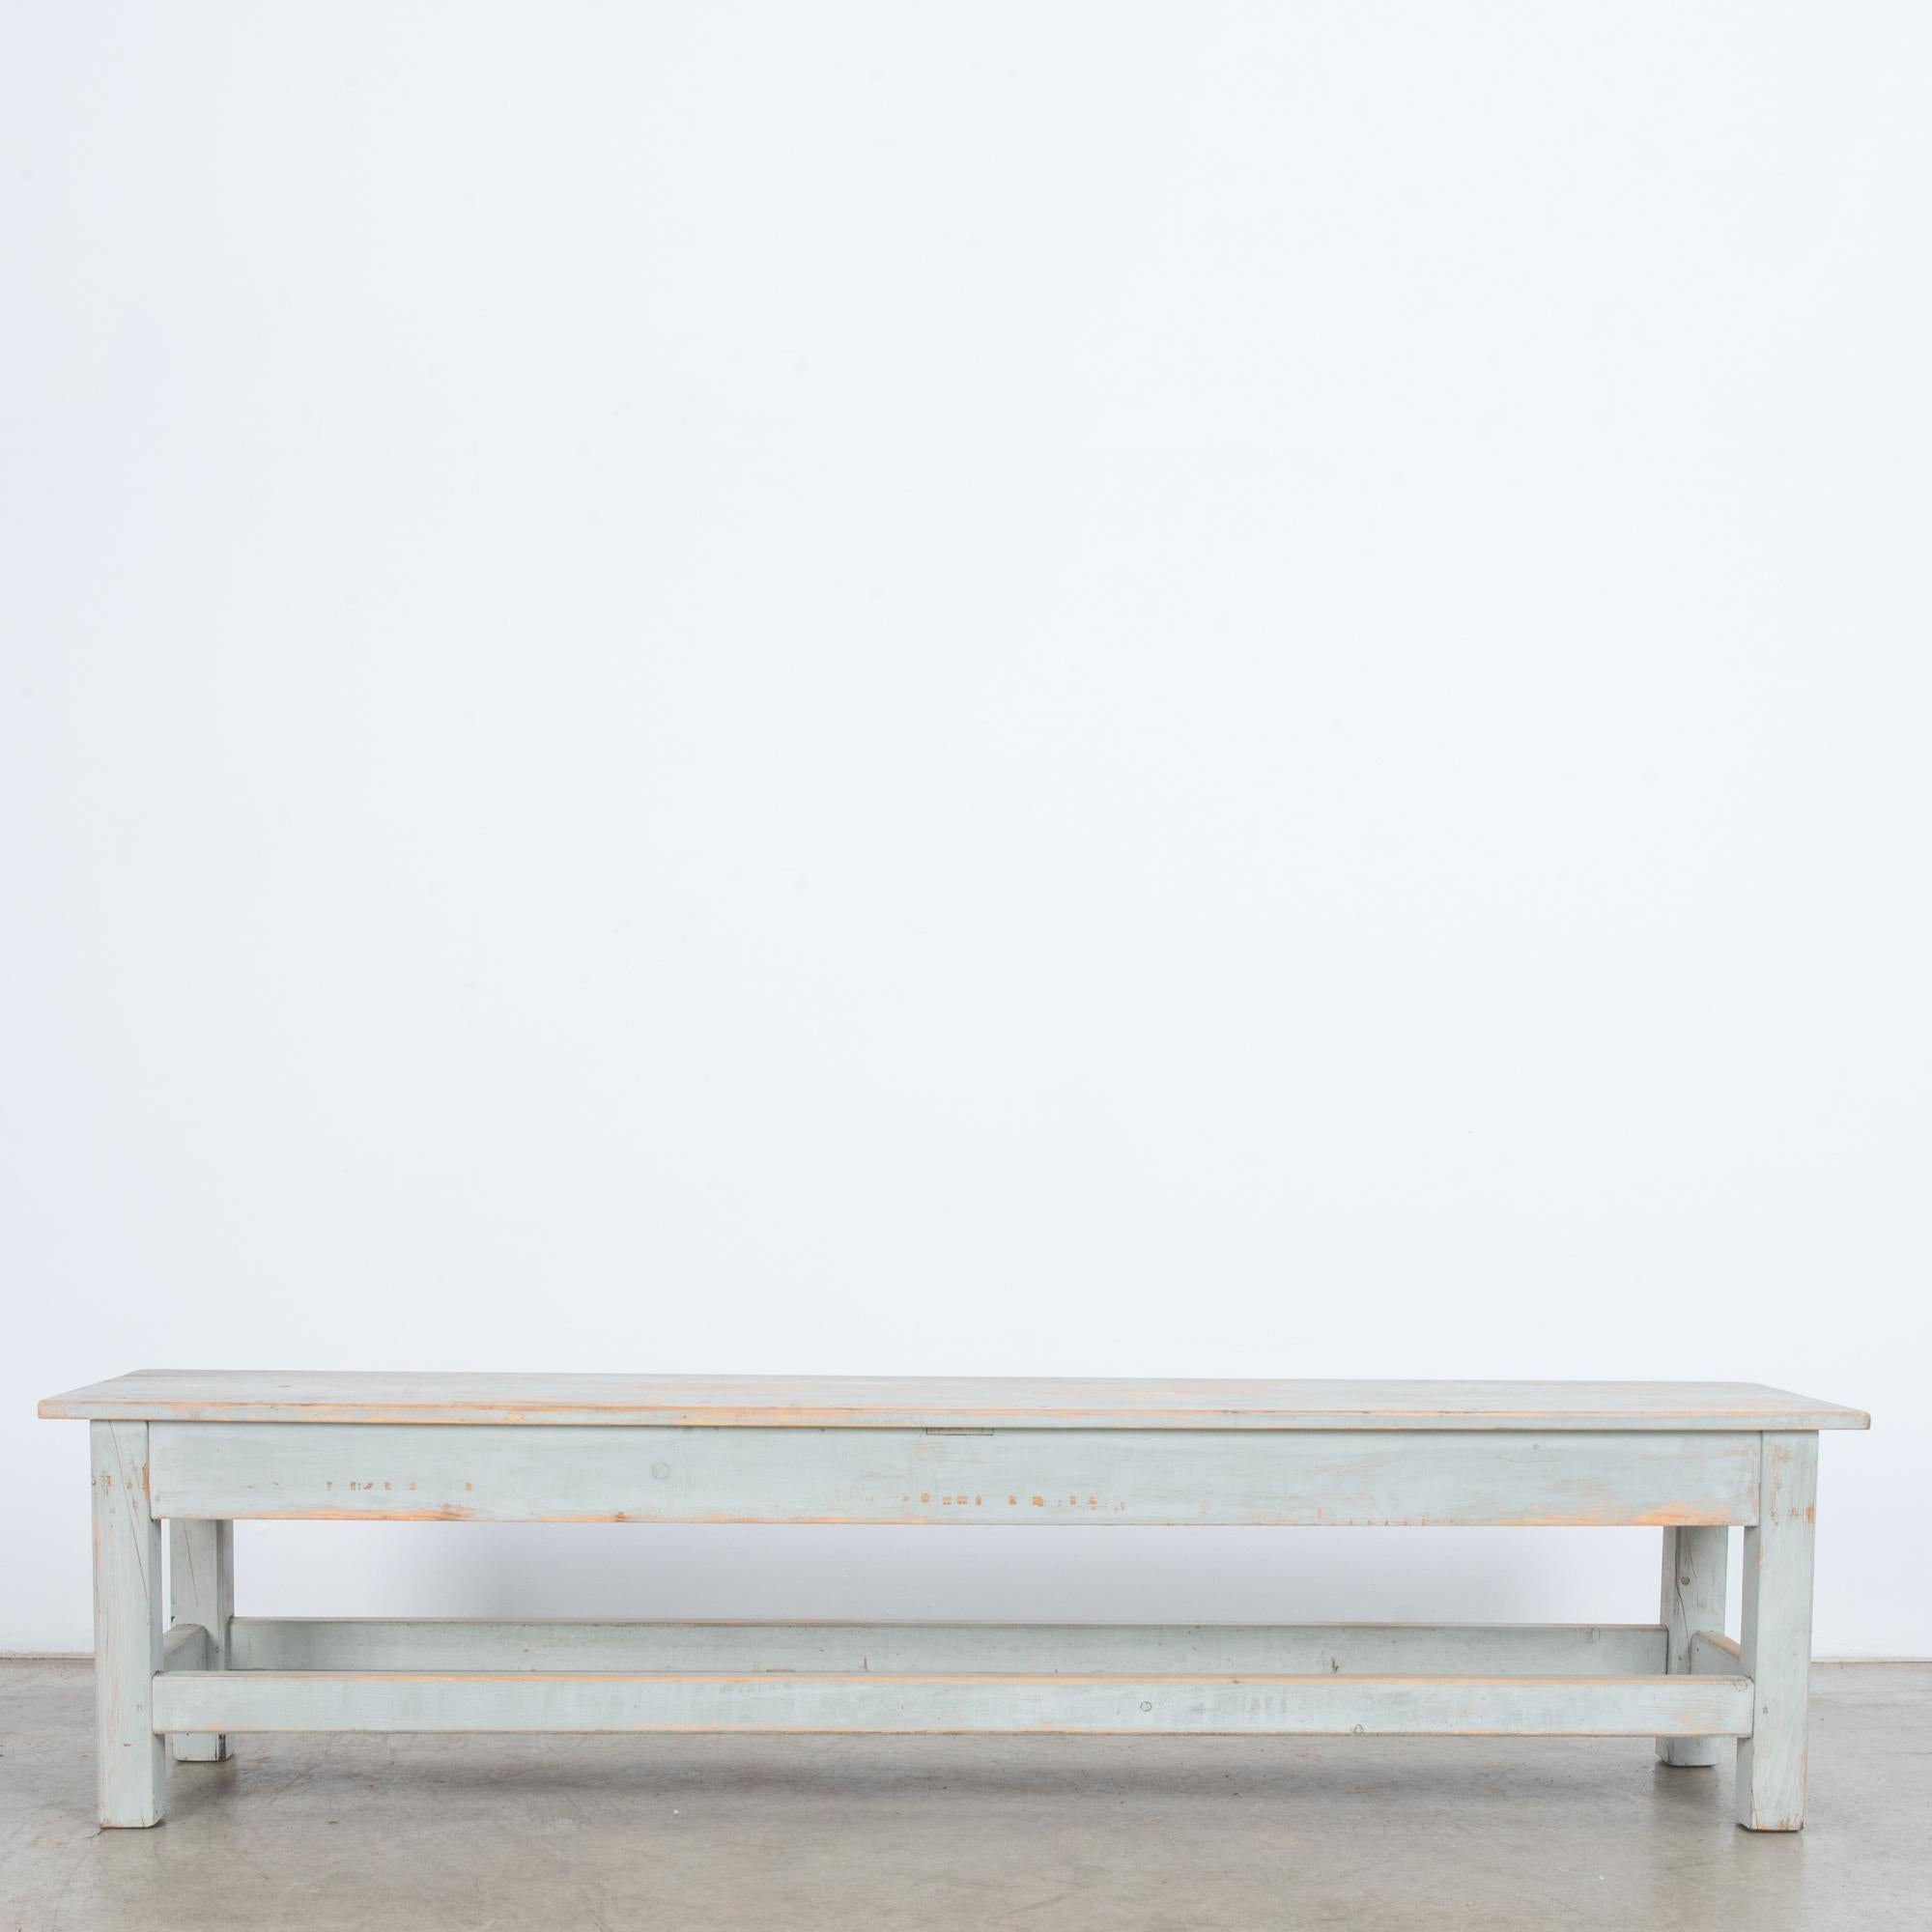 This wooden bench was made in Central Europe, circa 1960. The rectangular seat, four angular legs, and stretchers on all sides construct its geometric form. The natural wood and grain pattern is visible beneath the time-worn patina of the dusky blue